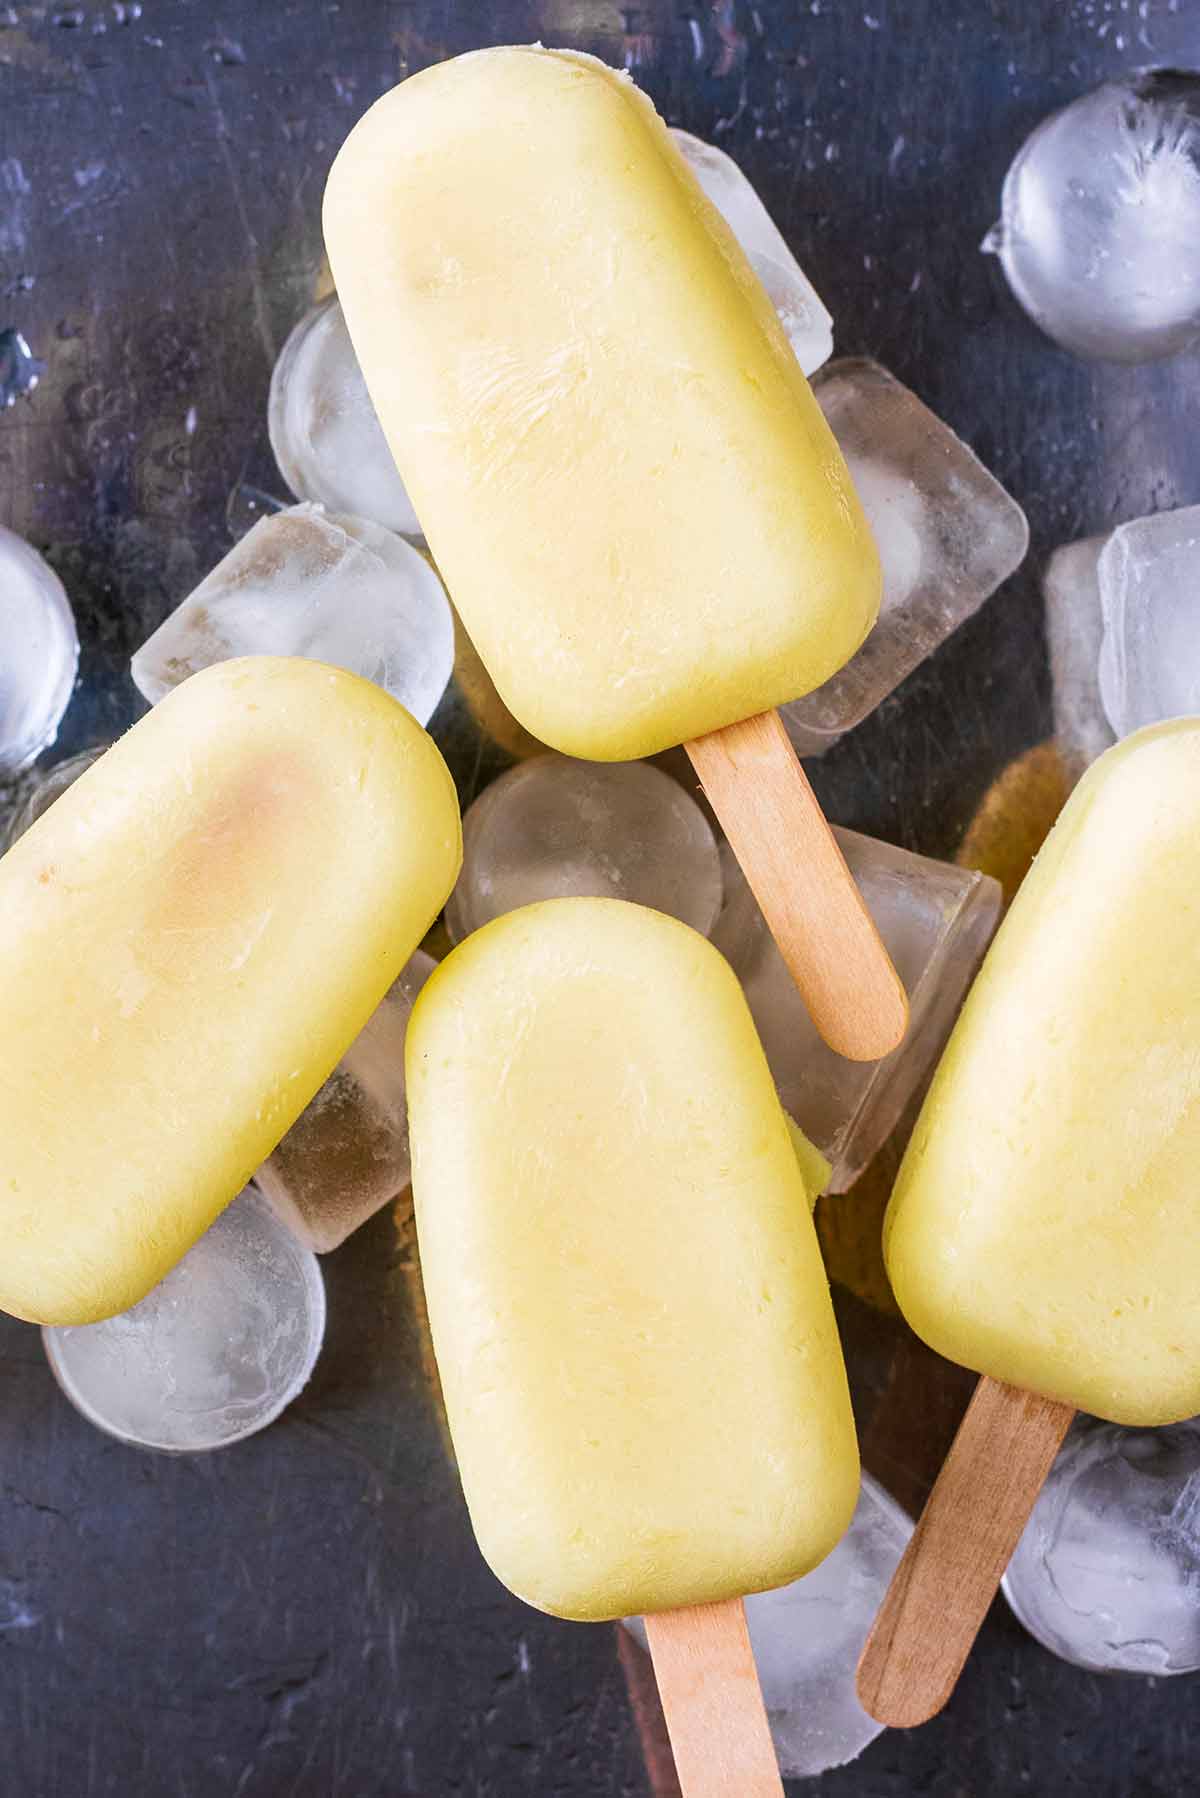 Pineapple lollies sat on some ice cubes.